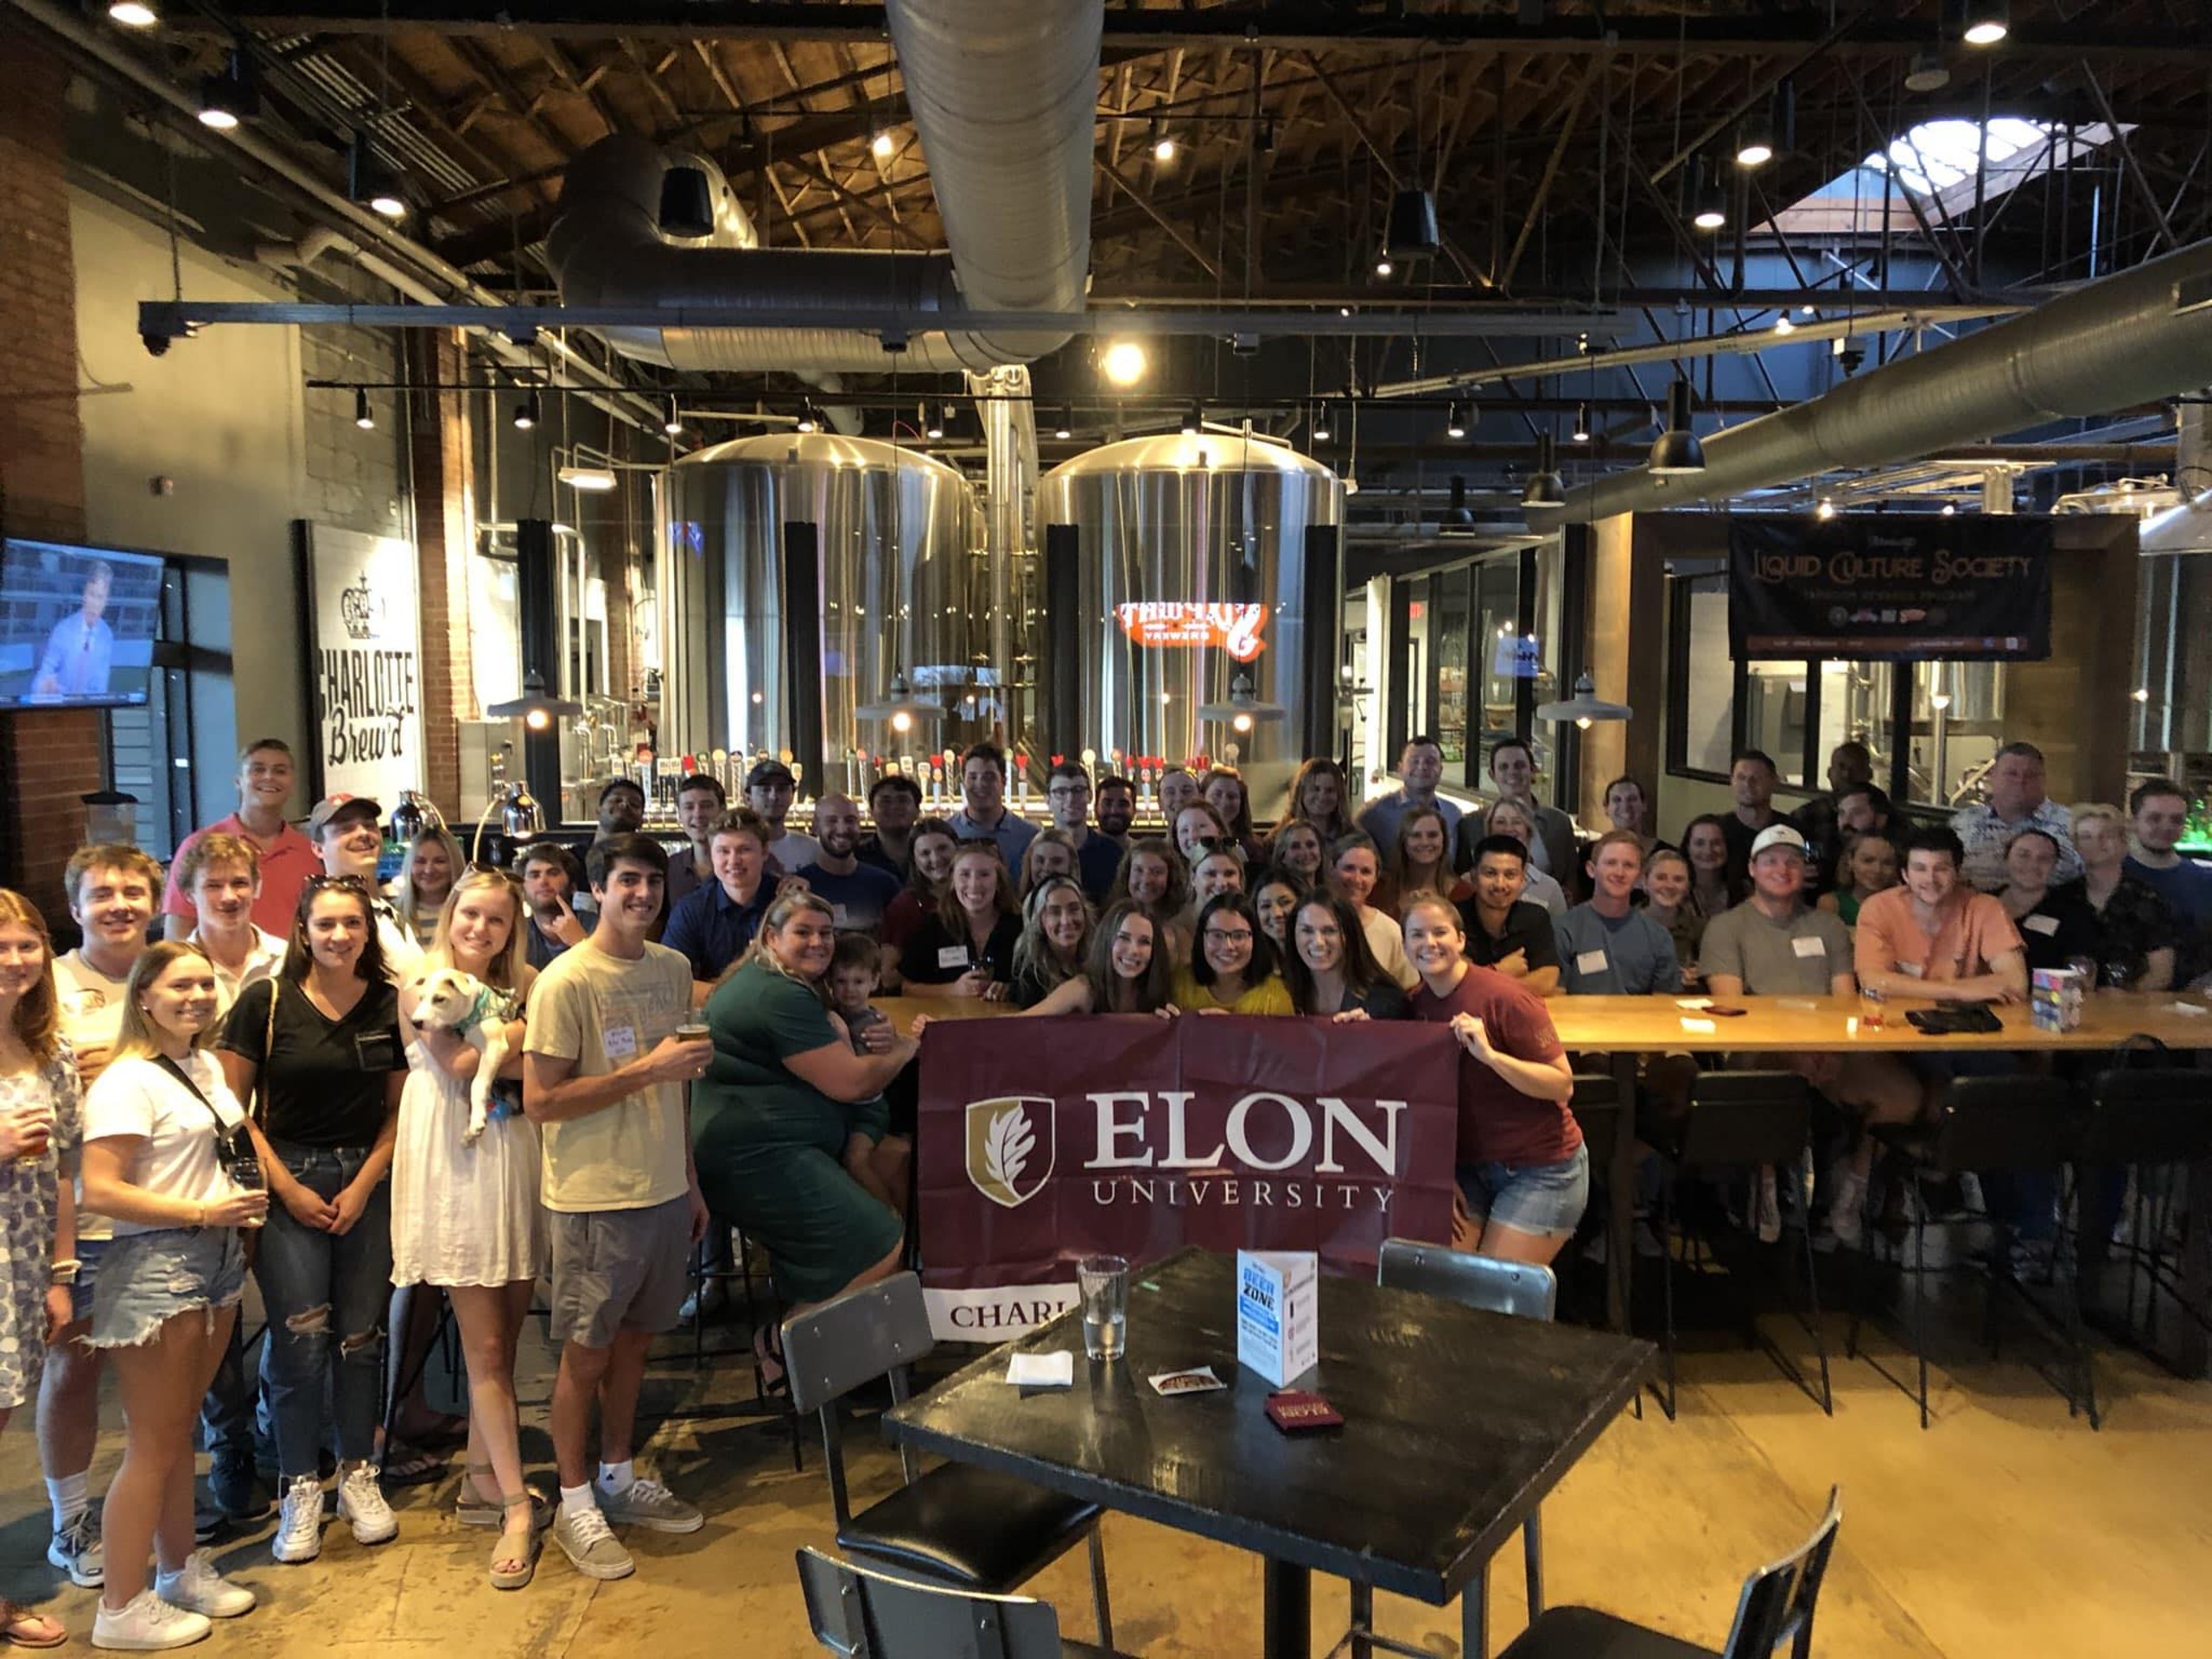 A group photo of participants in a venue holding an elon flag